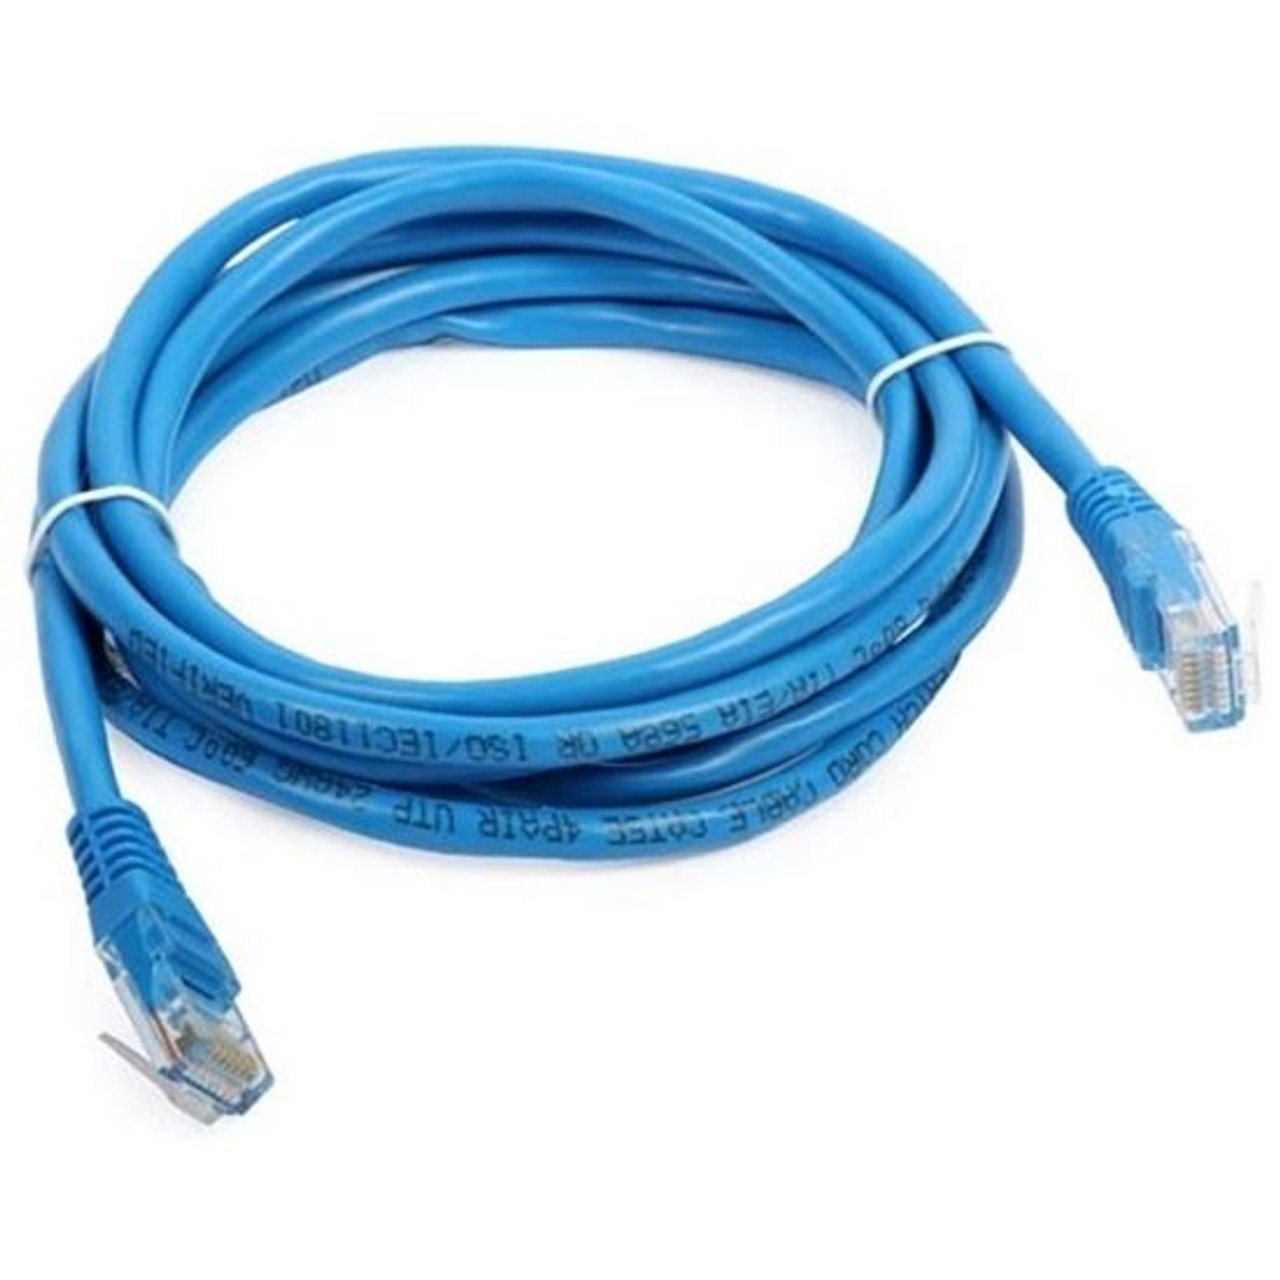 Eagle 14 FT CAT5e Patch Cord Cable Blue Ethernet Network UTP RJ45 350 MHz Ethernet Network 24 AWG Copper Stranded Male to Male RJ-45 Enhanced Category 5e!!!